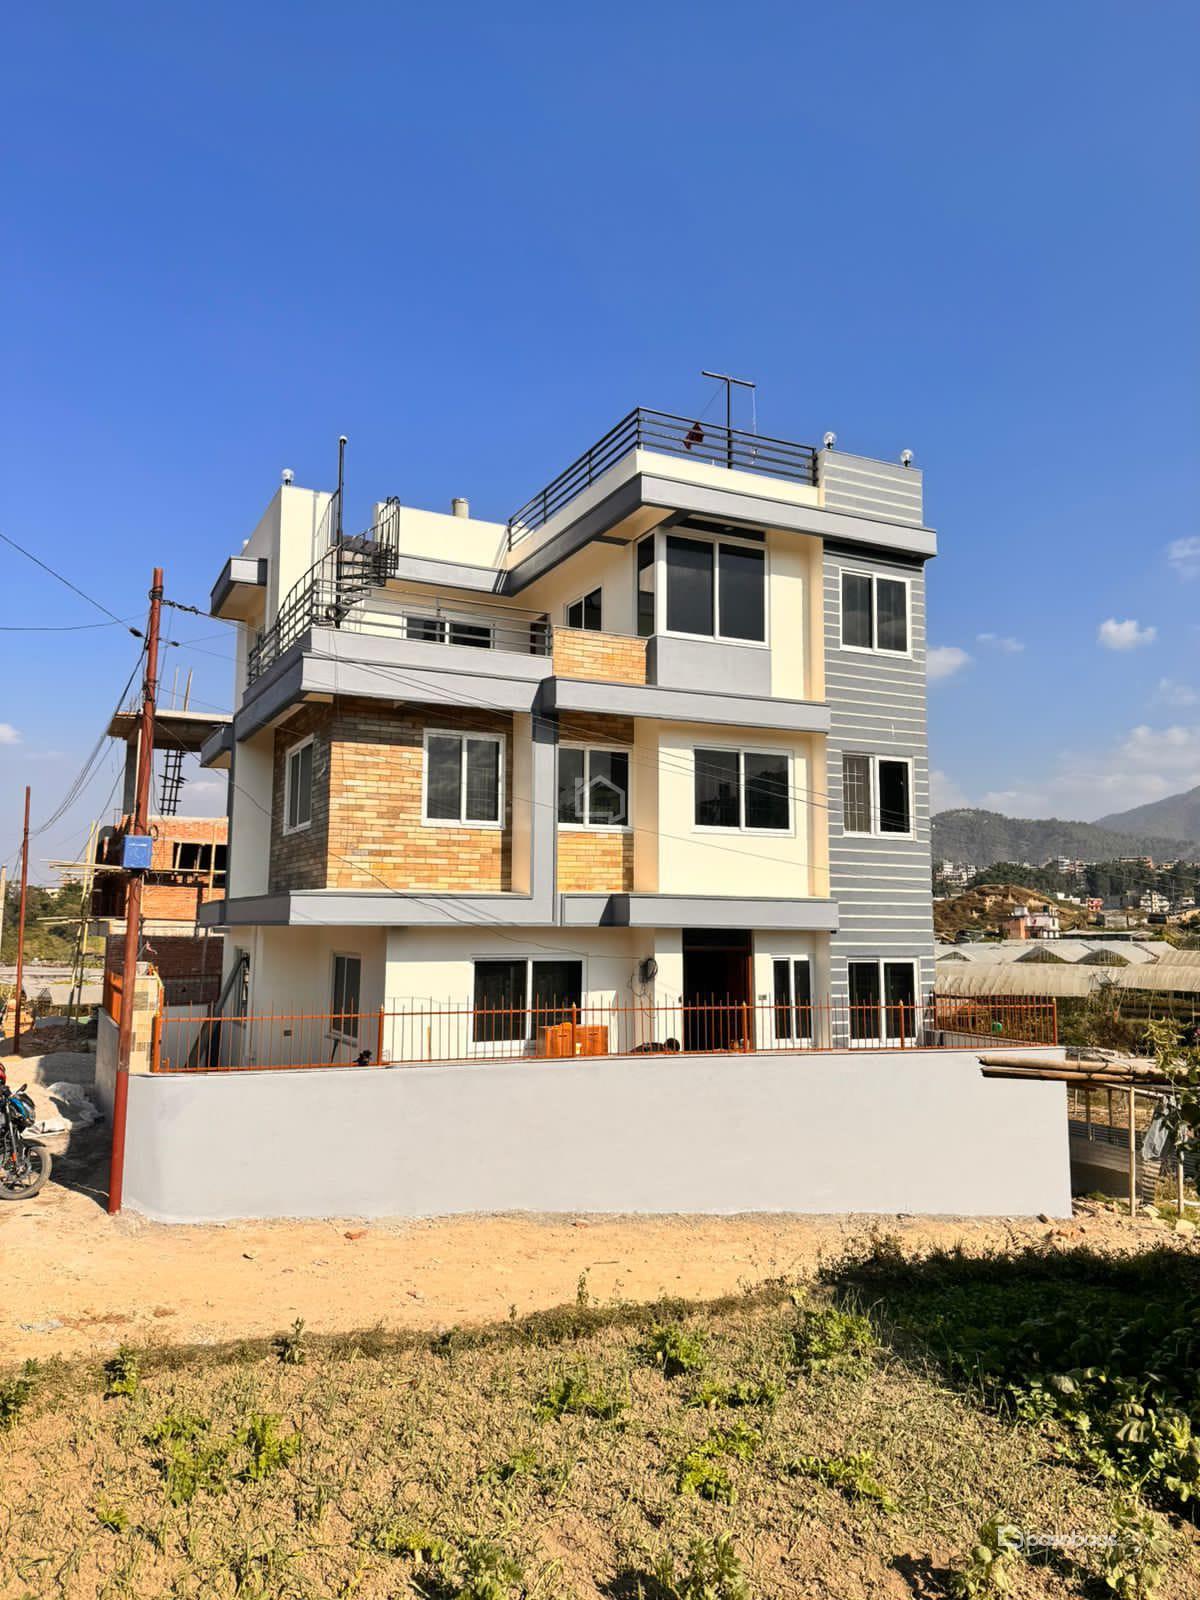 Residential : House for Sale in Dhapakhel, Lalitpur Image 3